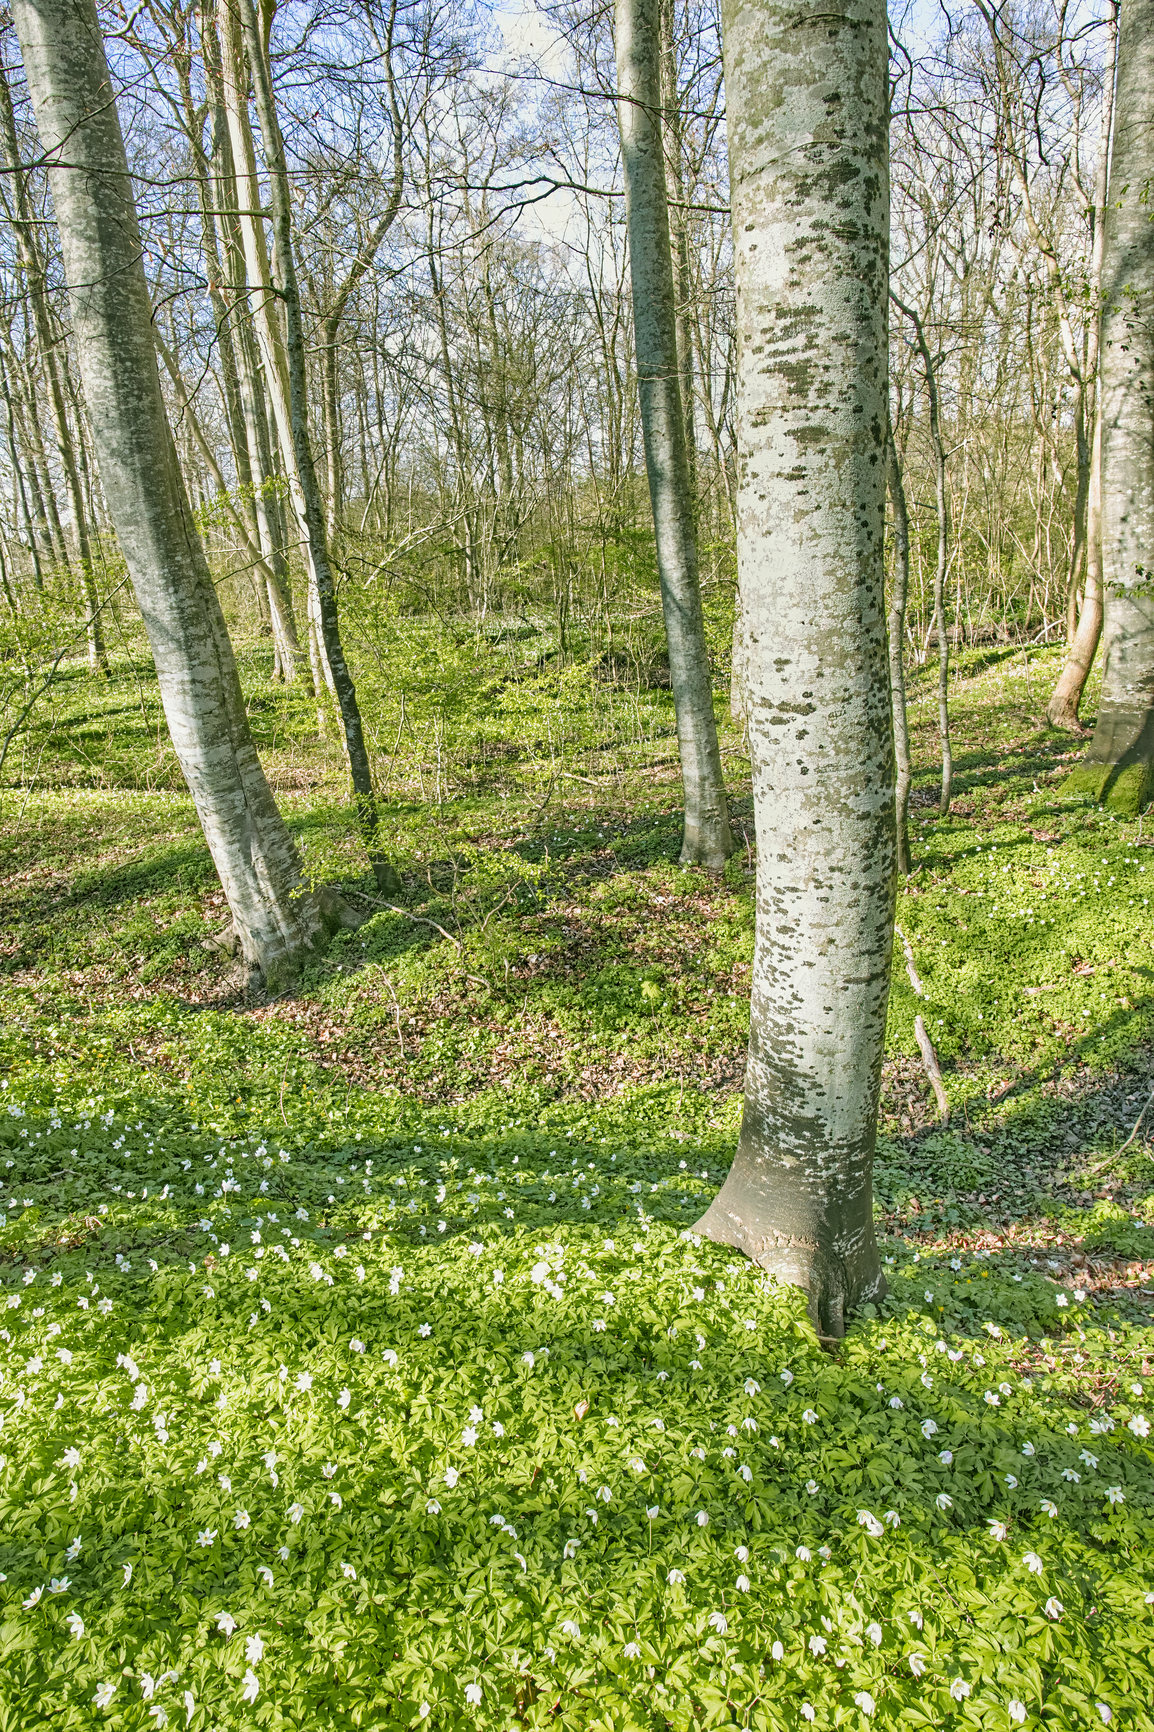 Buy stock photo Forest flower field near tree trunks in springtime. Beautiful nature scenery of white wood anemone flowers growing in a green pasture land or meadow. Lots of pretty white wild flowers in nature